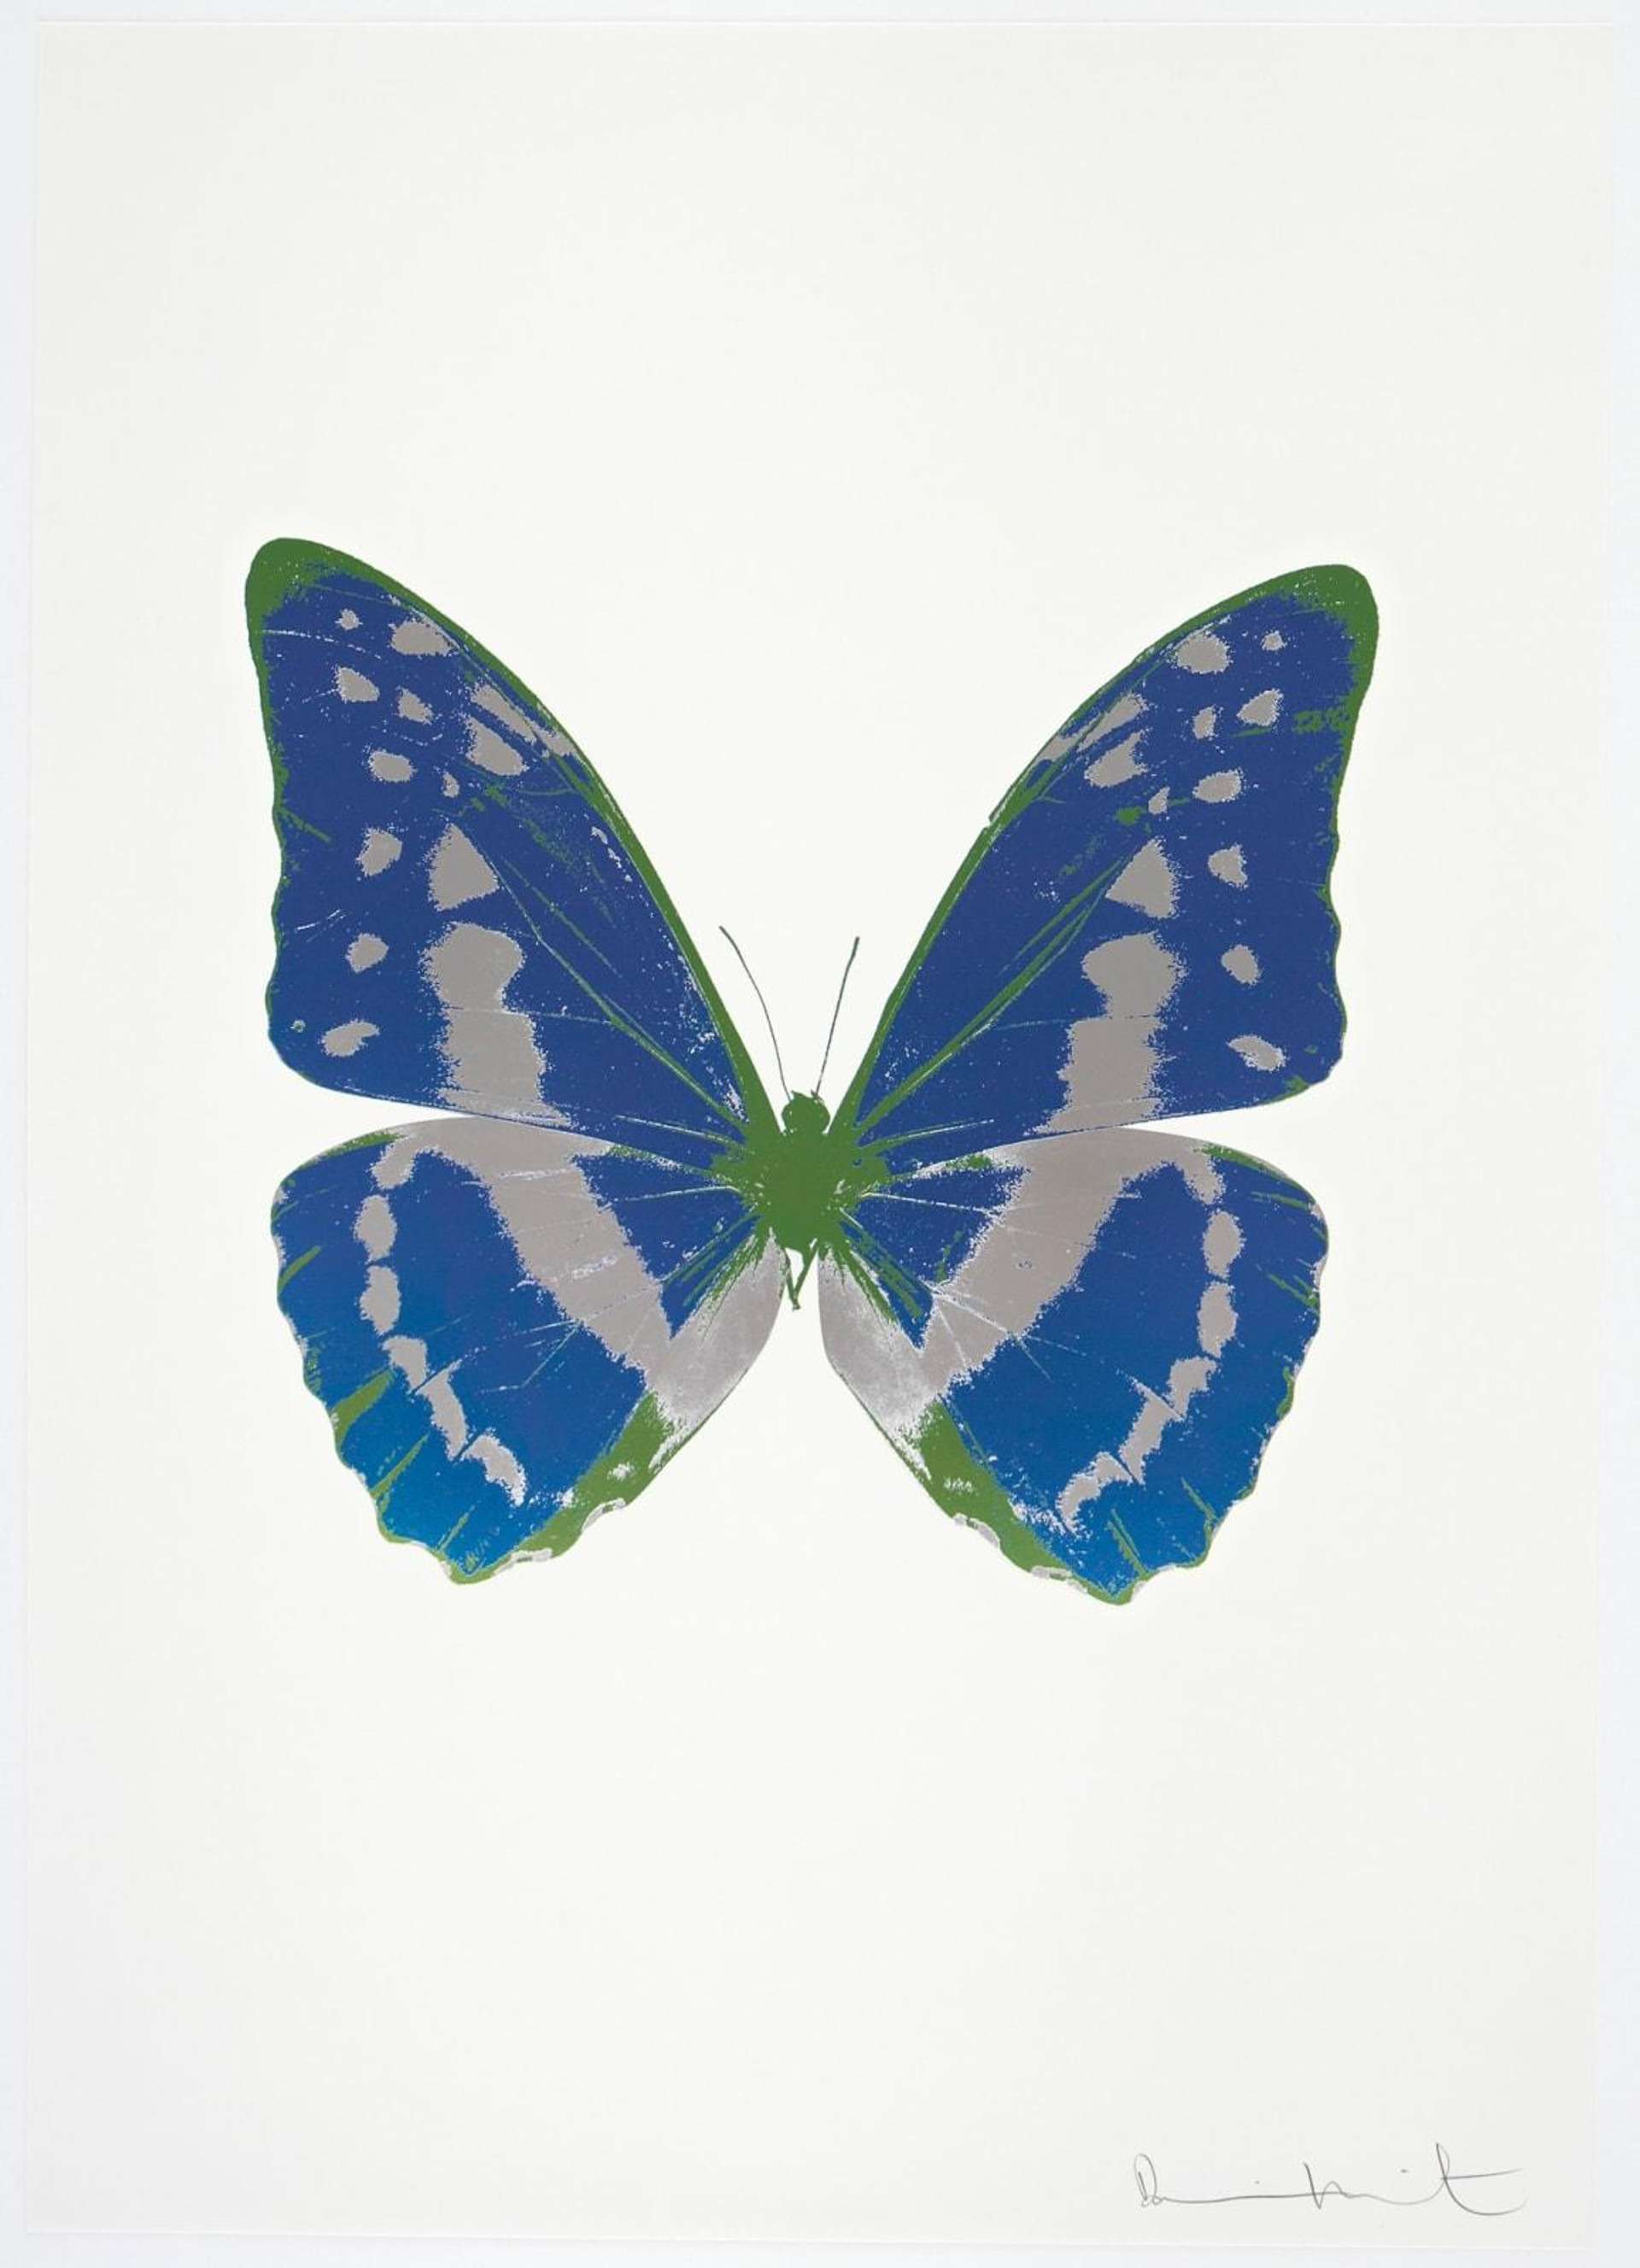 Damien Hirst: The Souls III (frost blue, silver gloss, leaf green) - Signed Print